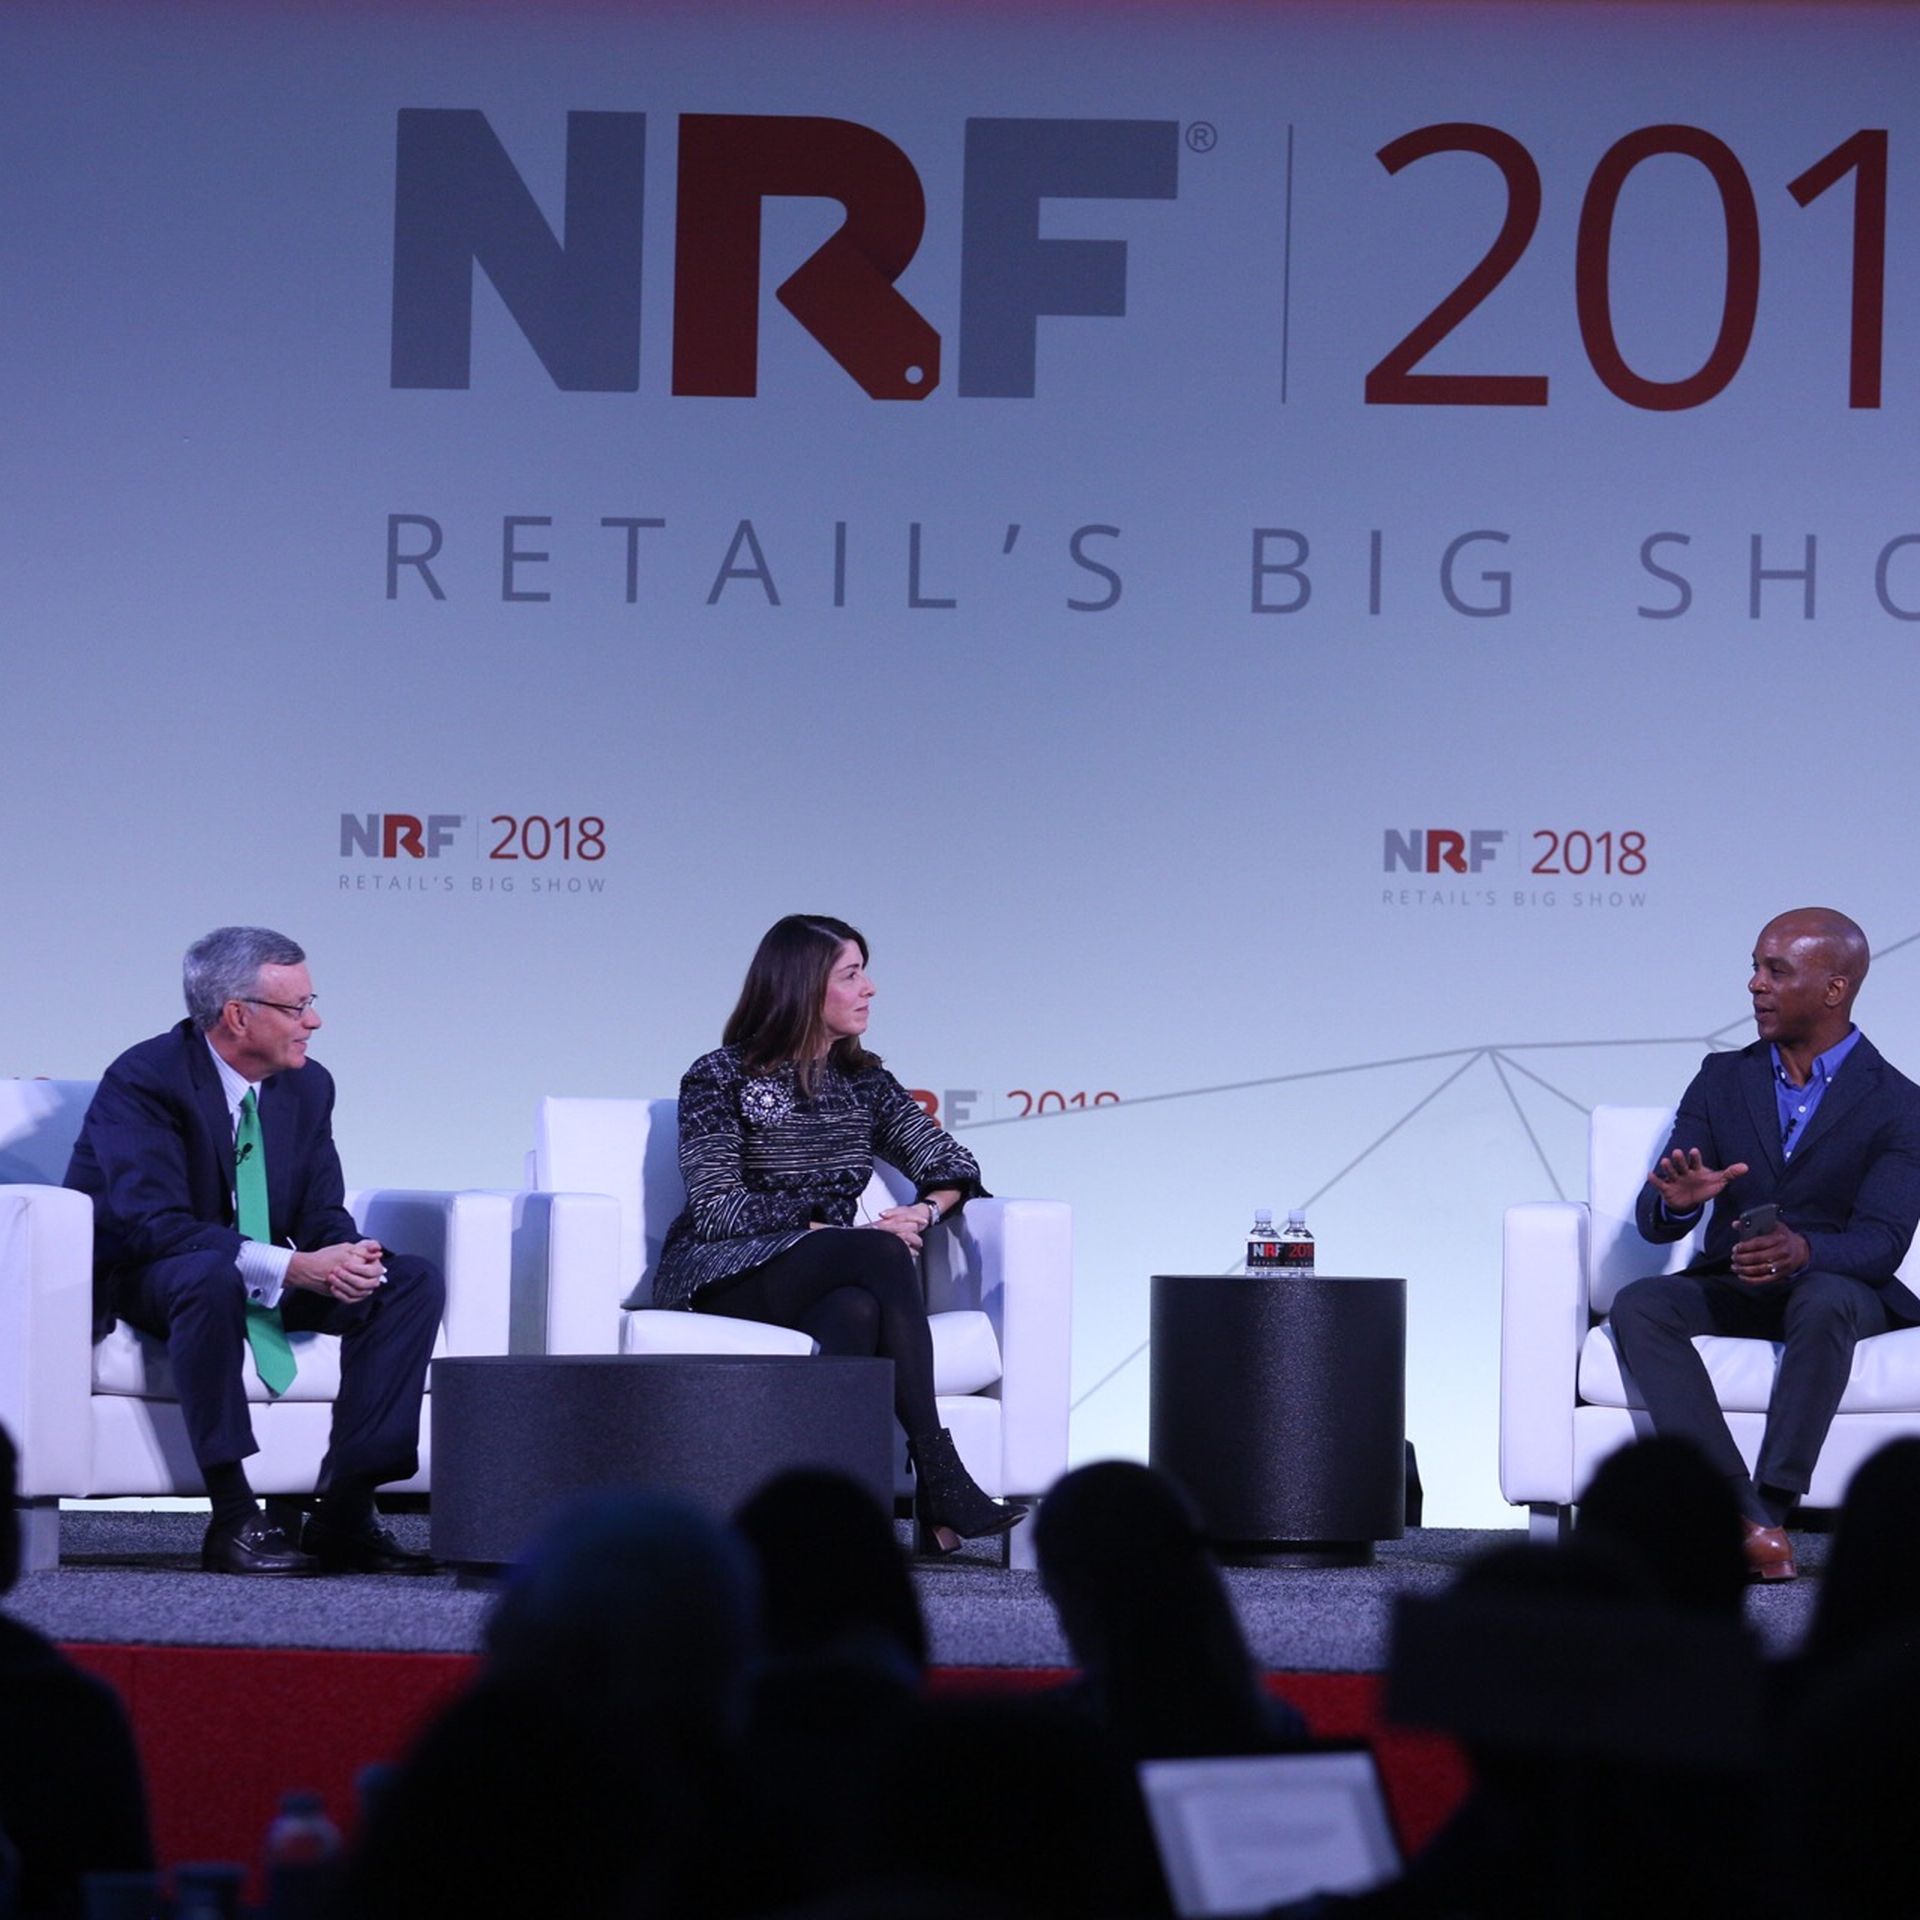 Visa CEO Al Kelly, Neiman Marcus CEO Karen Katz, and CNBC's Jon Fortt speak onstage at the National Retail Federation's Big Show Conference.